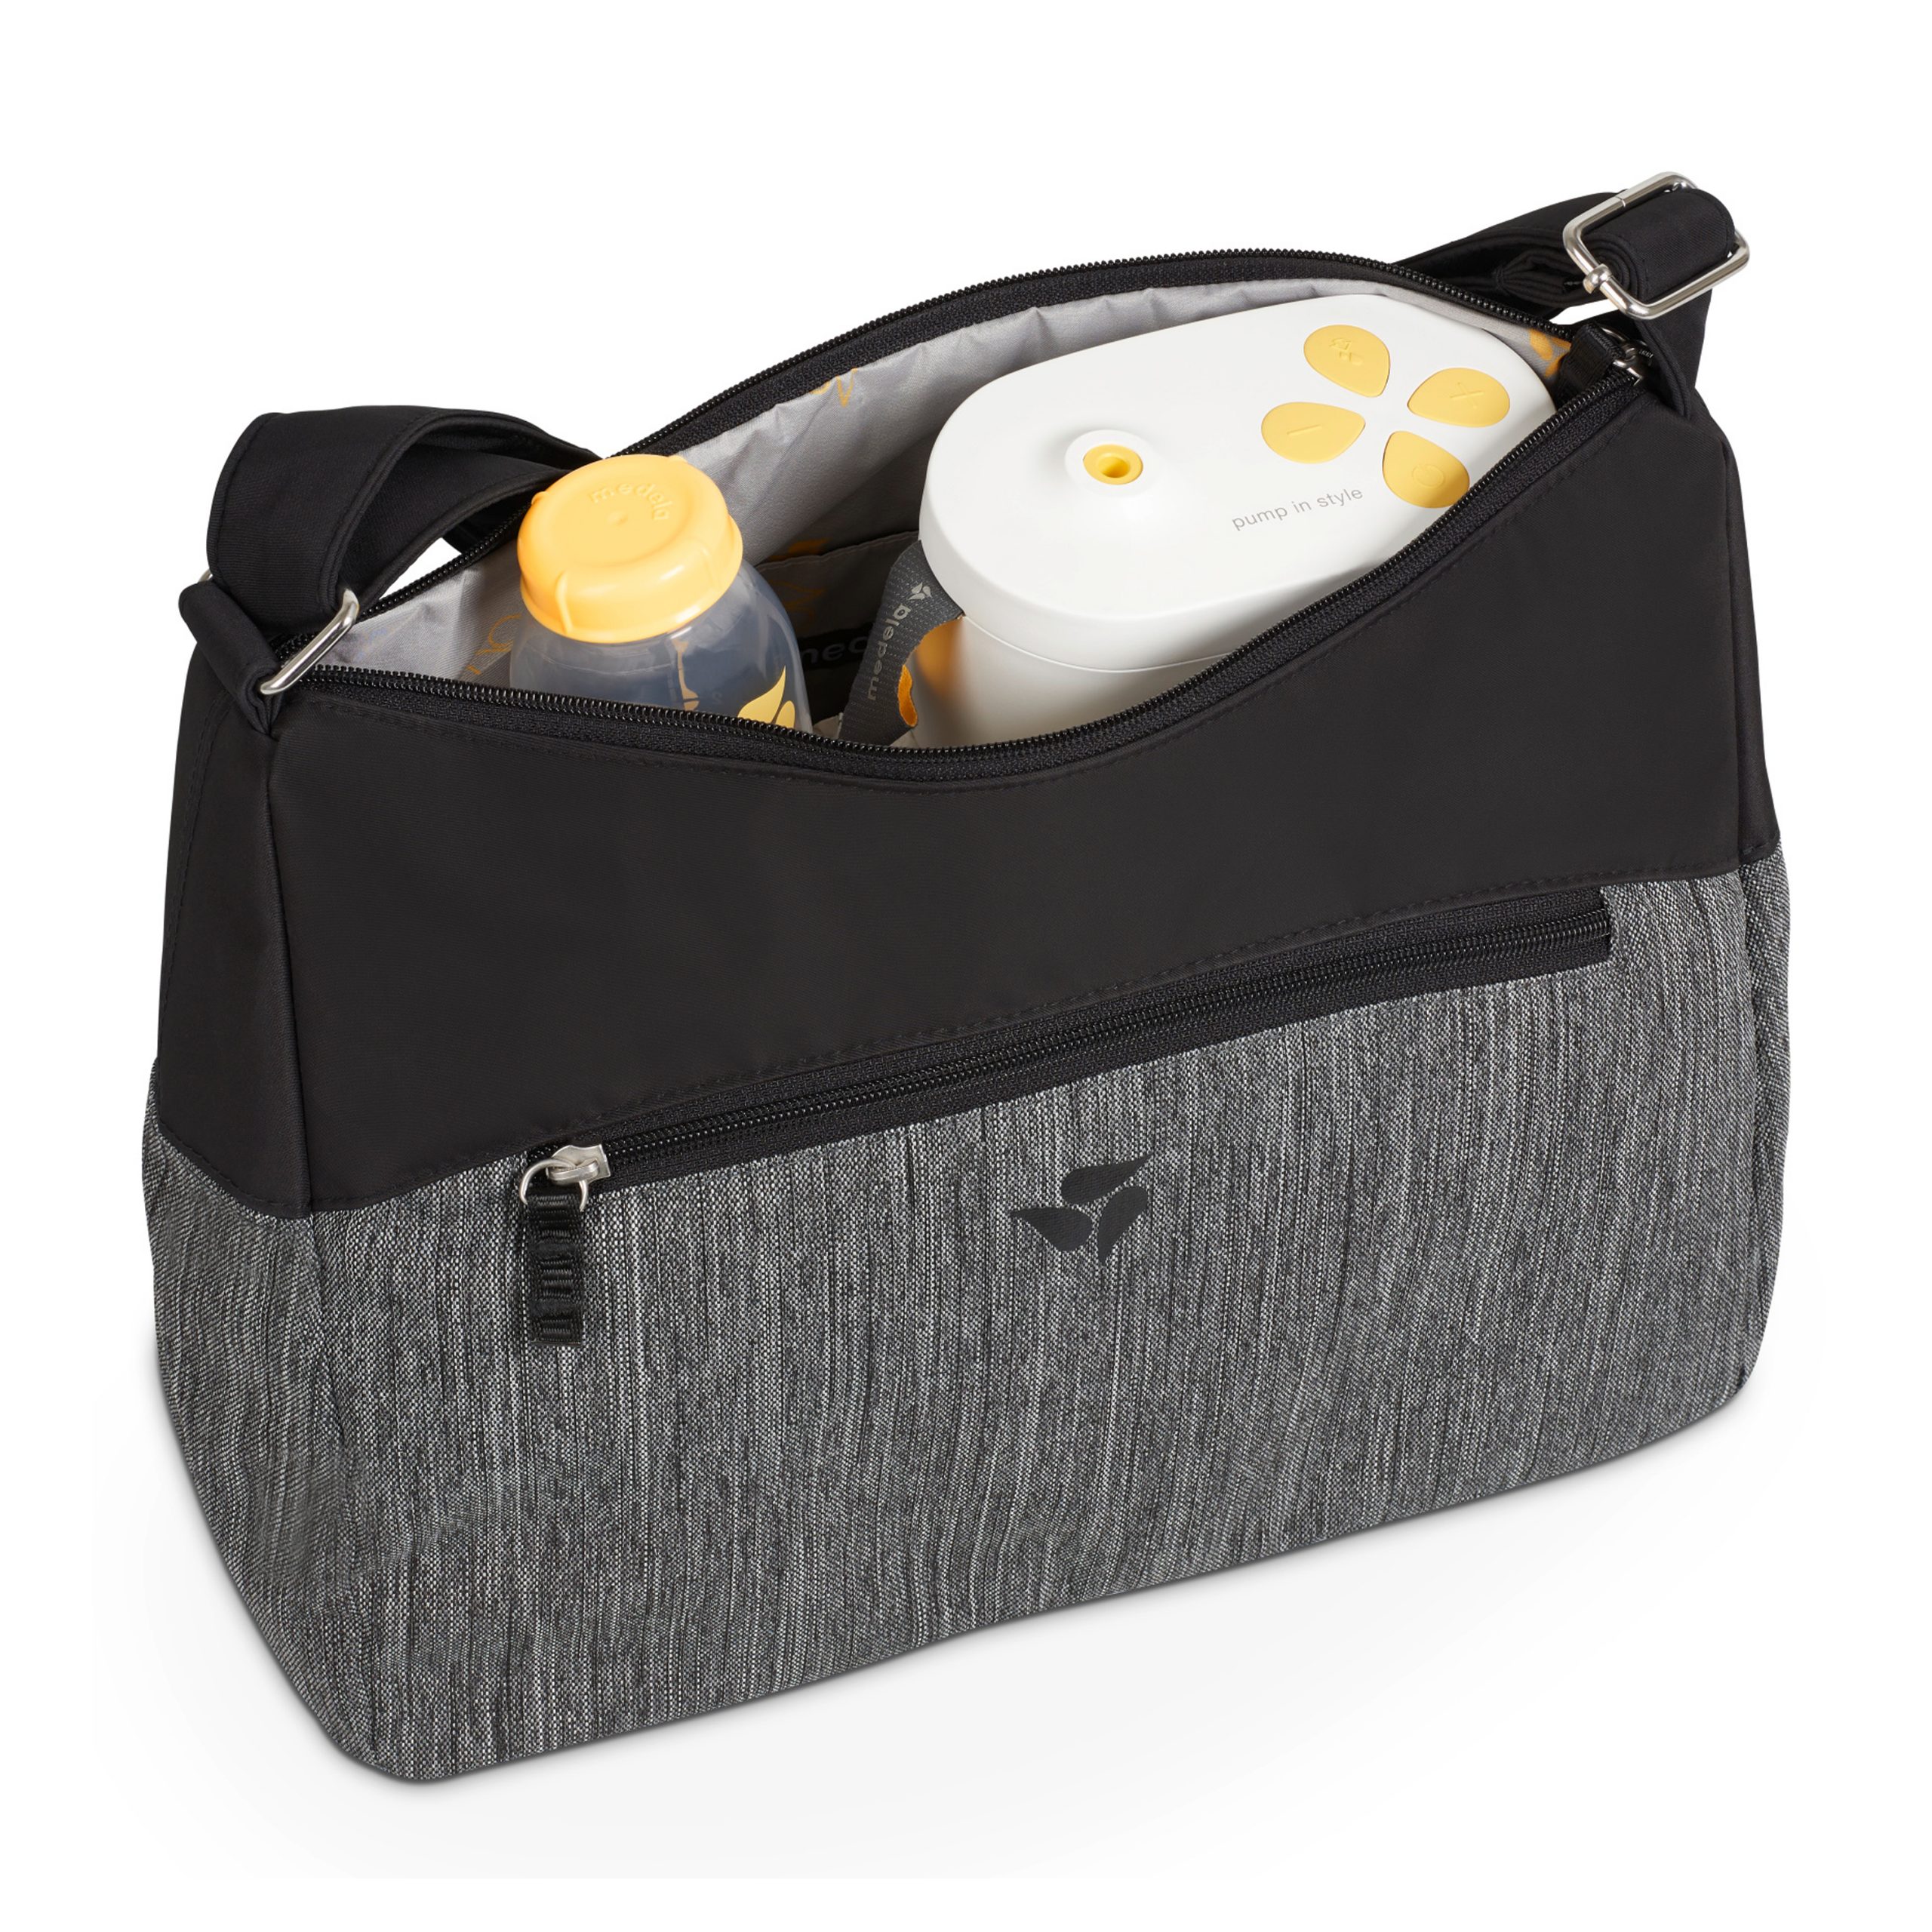 Medela Pump in Style with Max Flow Breast Pump Set with Tote Bag